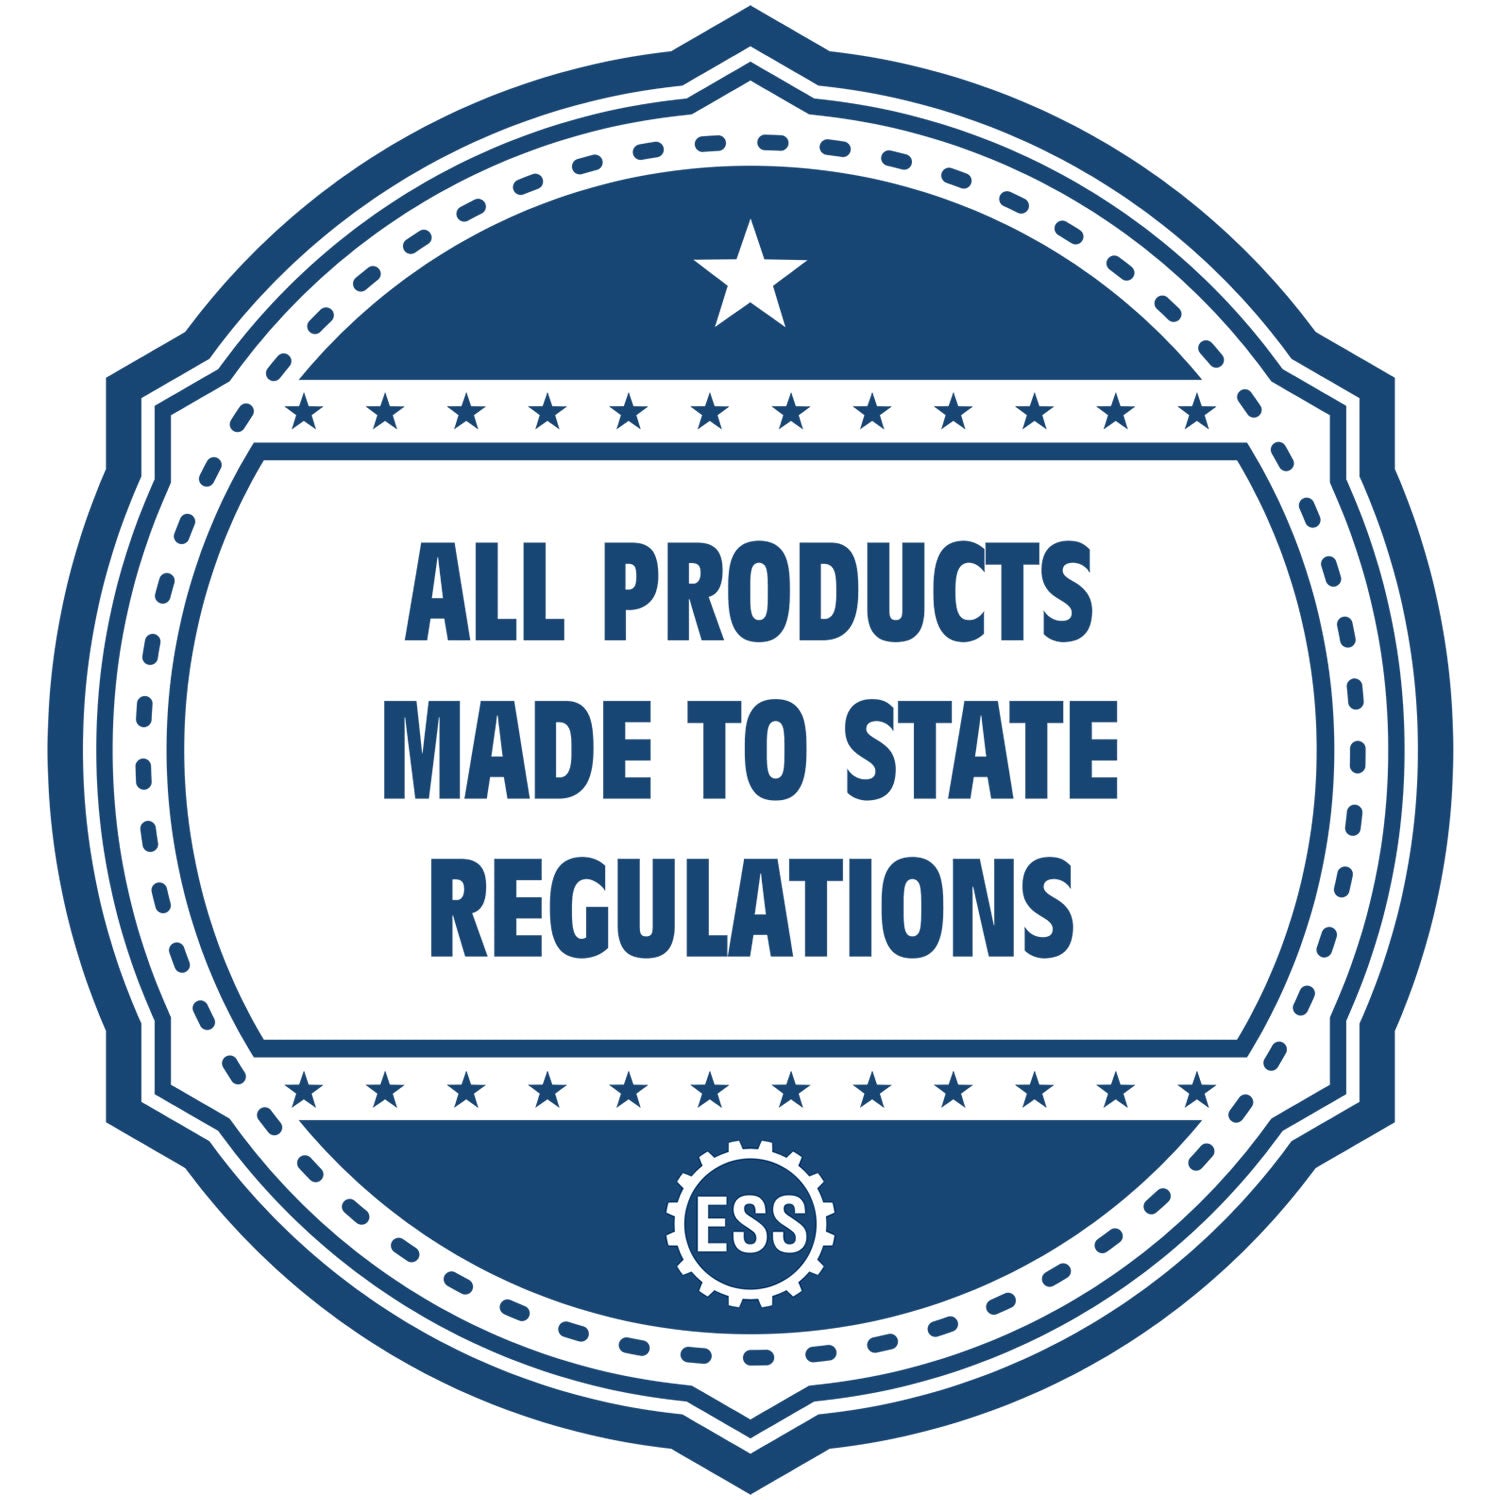 An icon or badge element for the Self-Inking Oklahoma PE Stamp showing that this product is made in compliance with state regulations.